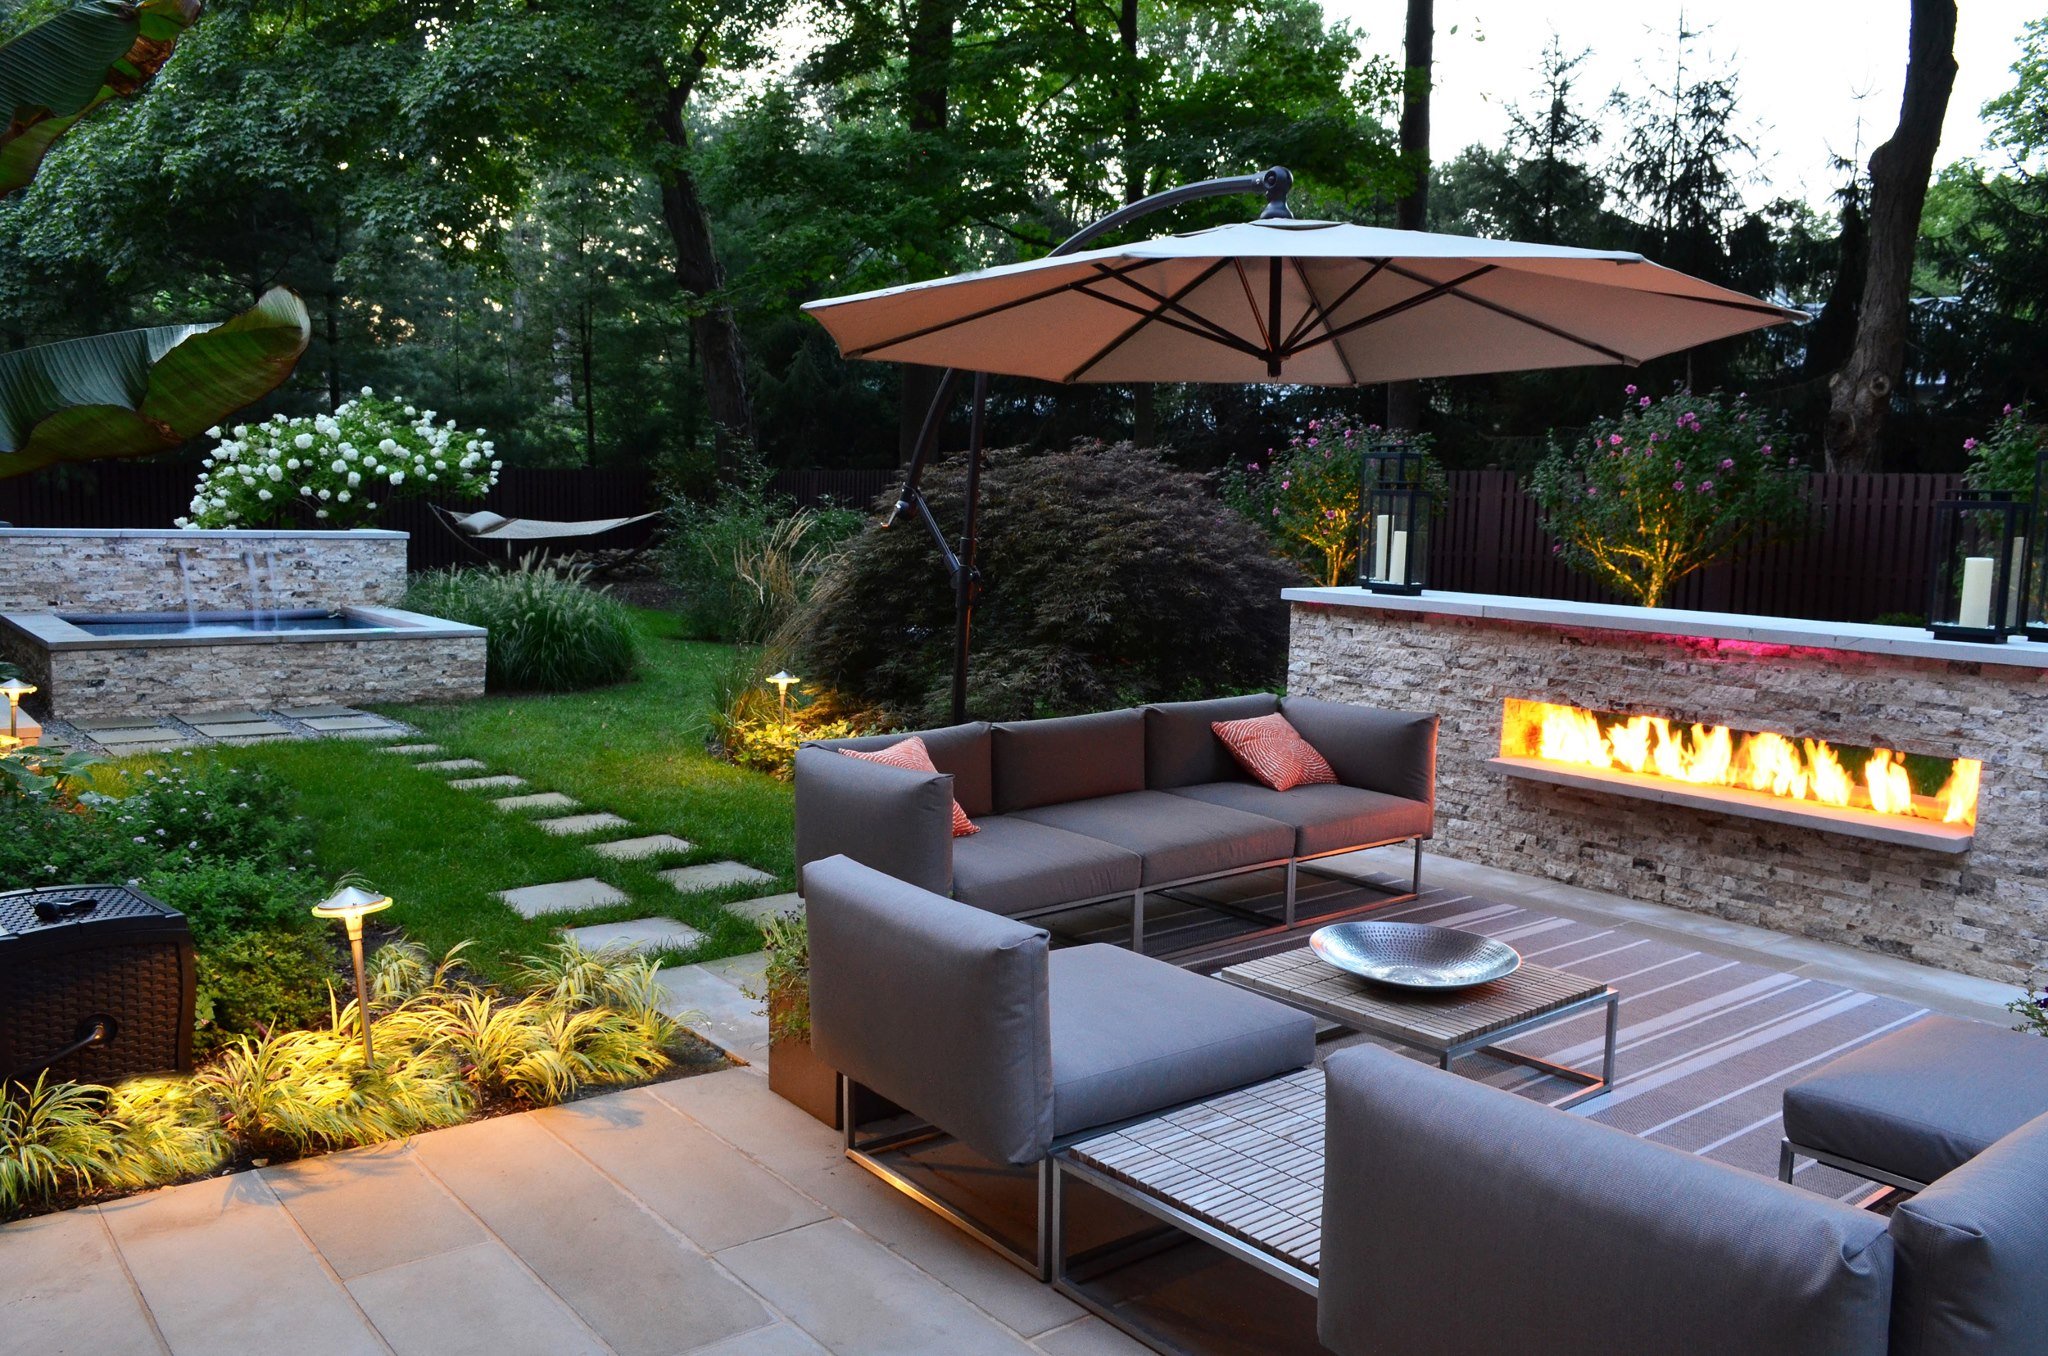 exterior-patio-landscaping-witching-design-ideas-of-backyard-landscaping-with-stone-garden-path-also-green-grass-and-rectangle-shape-pond-waterfall-concrete-floor-gray-color-outdoor-sofas-fireplace-wh.jpg